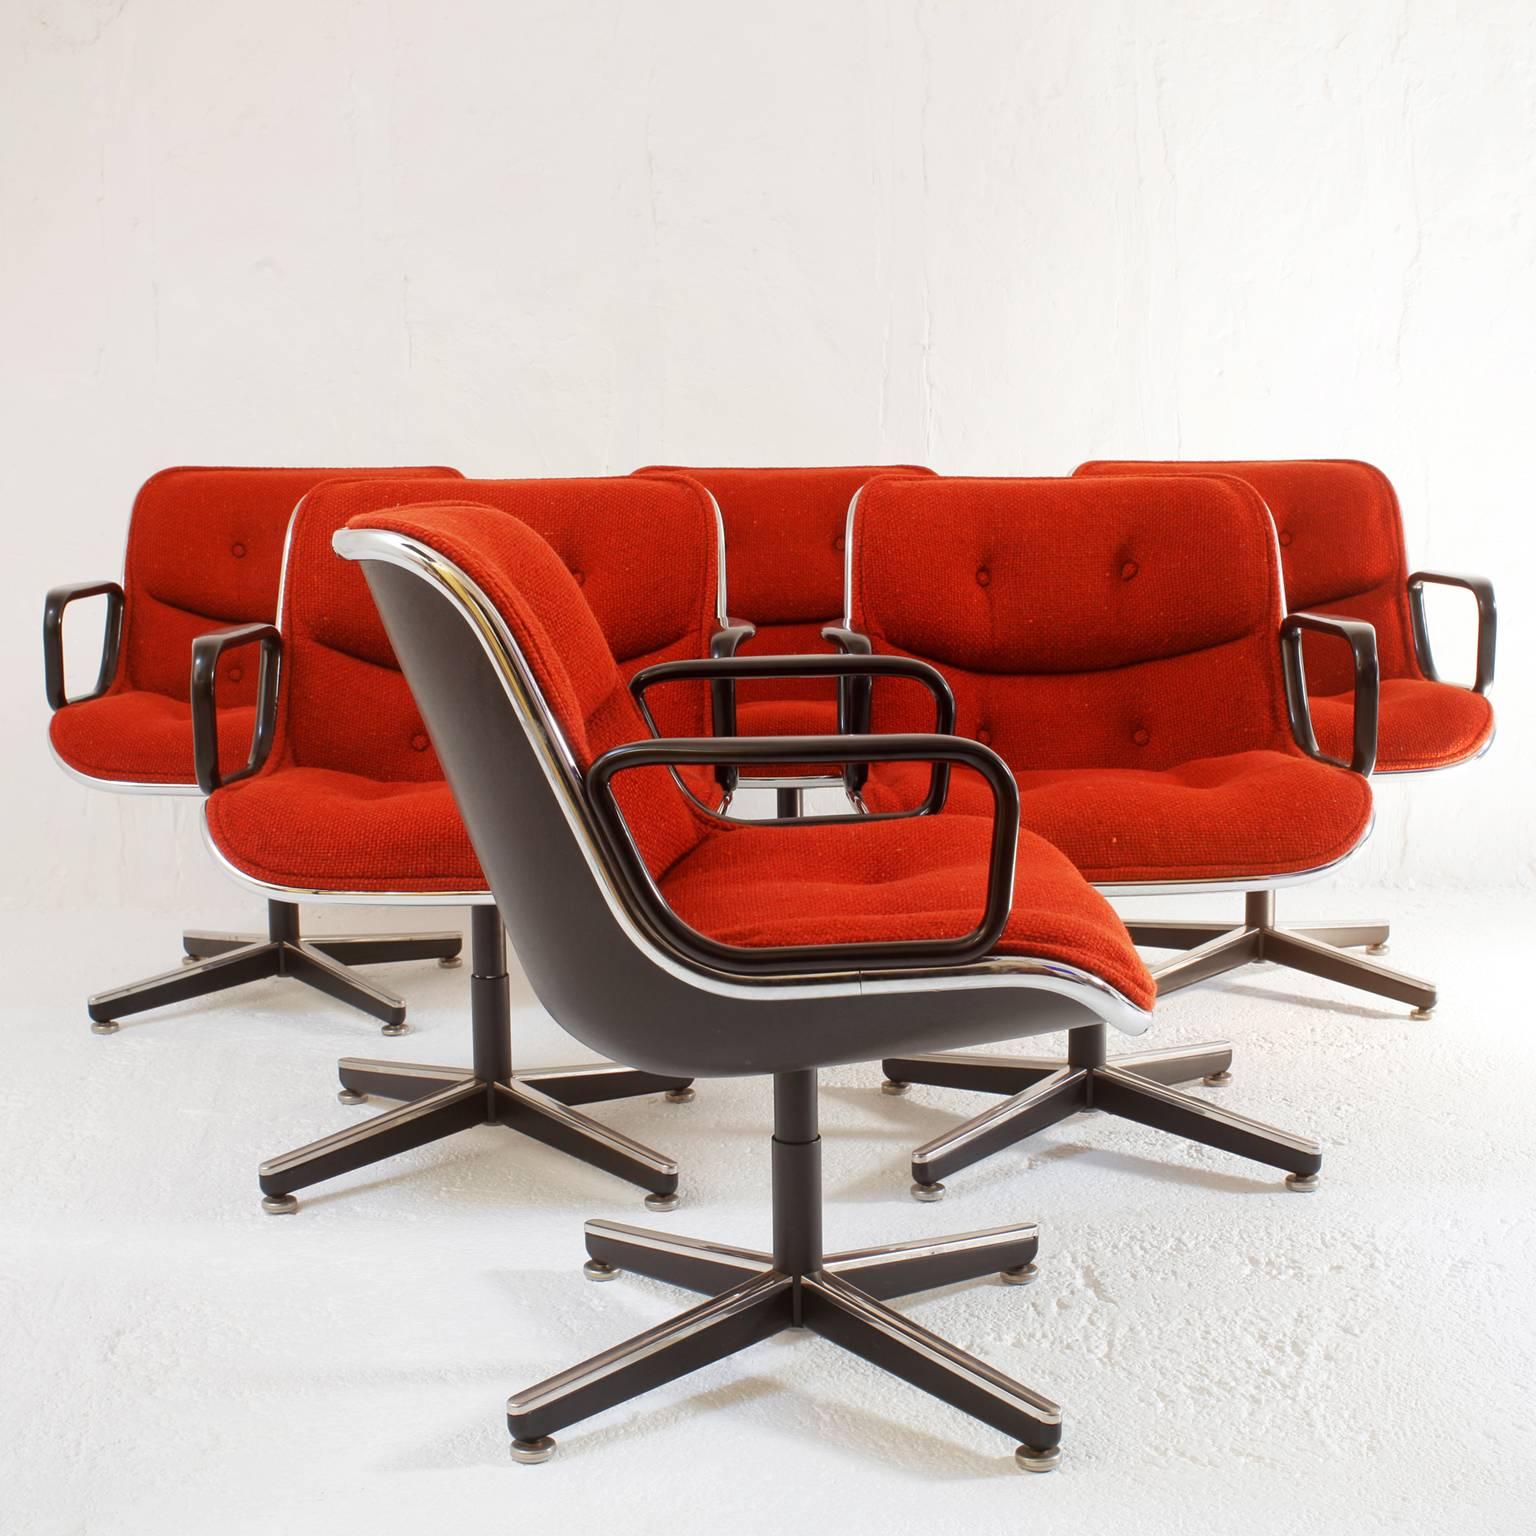 Set of six Charles Pollock executive swivel armchairs for Knoll.
Original orange color wool upholstery. 
Four-branch star chrome-plated legs,
circa 1970.